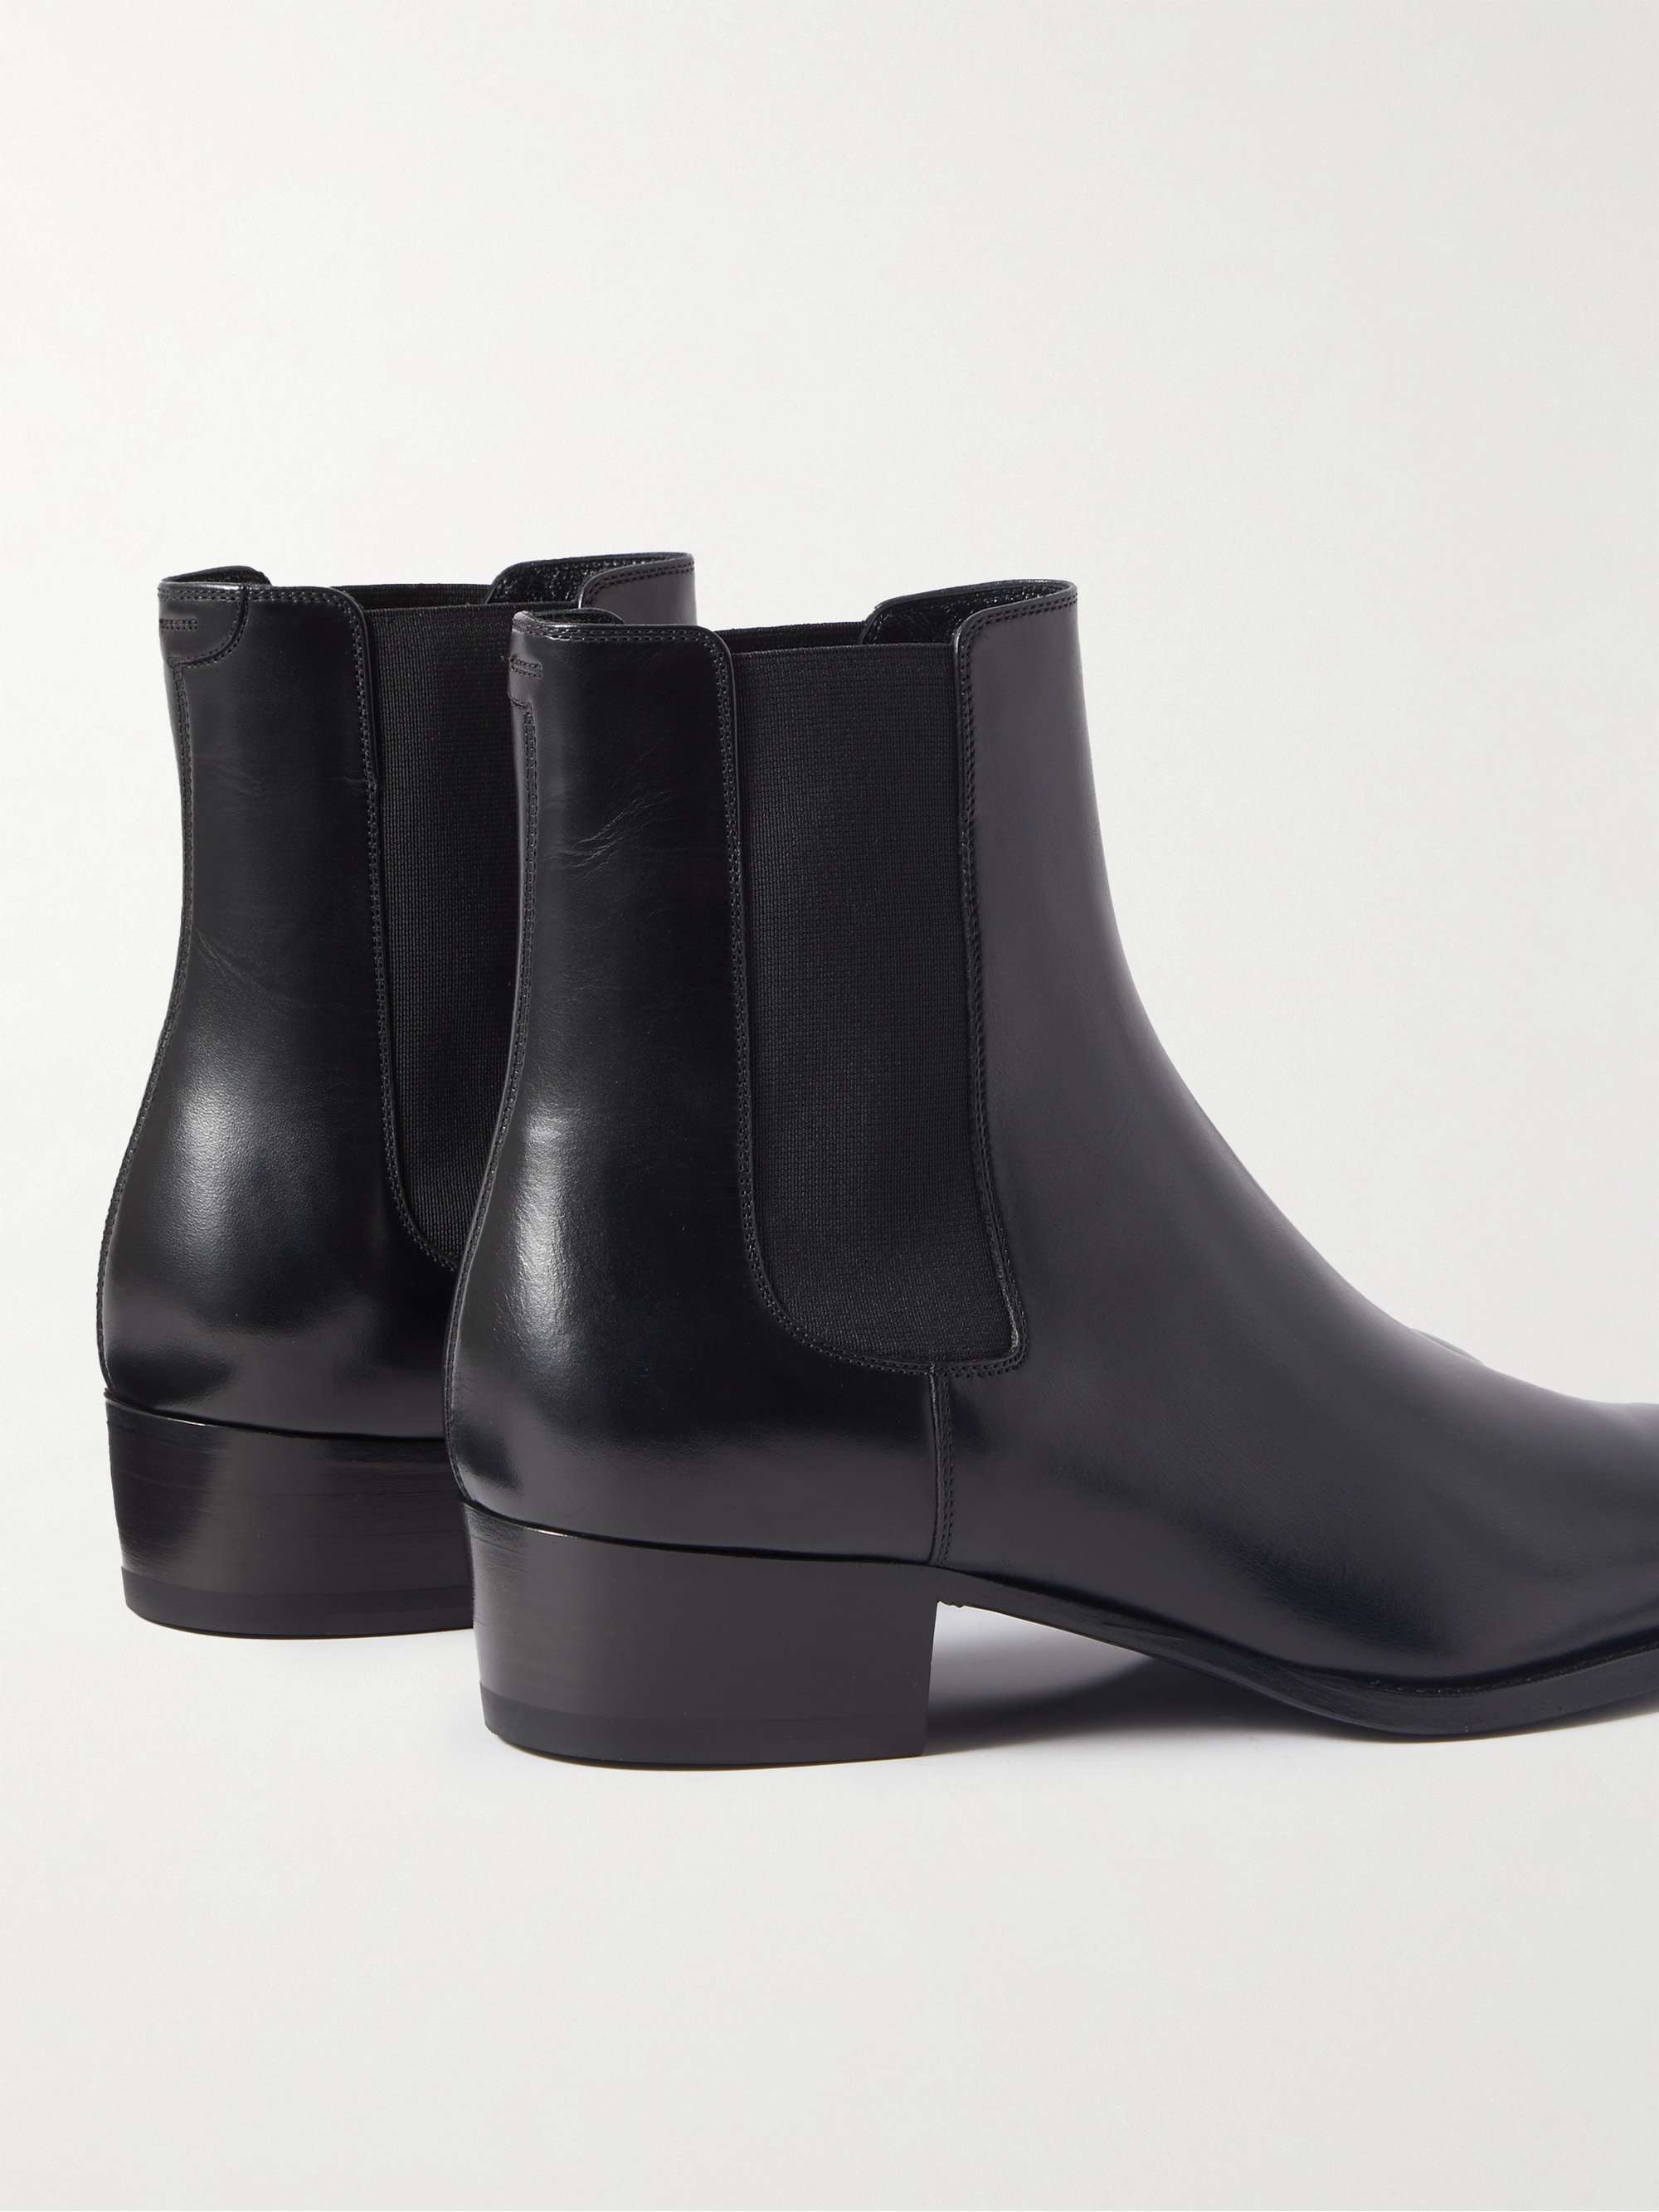 CELINE HOMME Drugstore Glossed-Leather Chelsea Boots